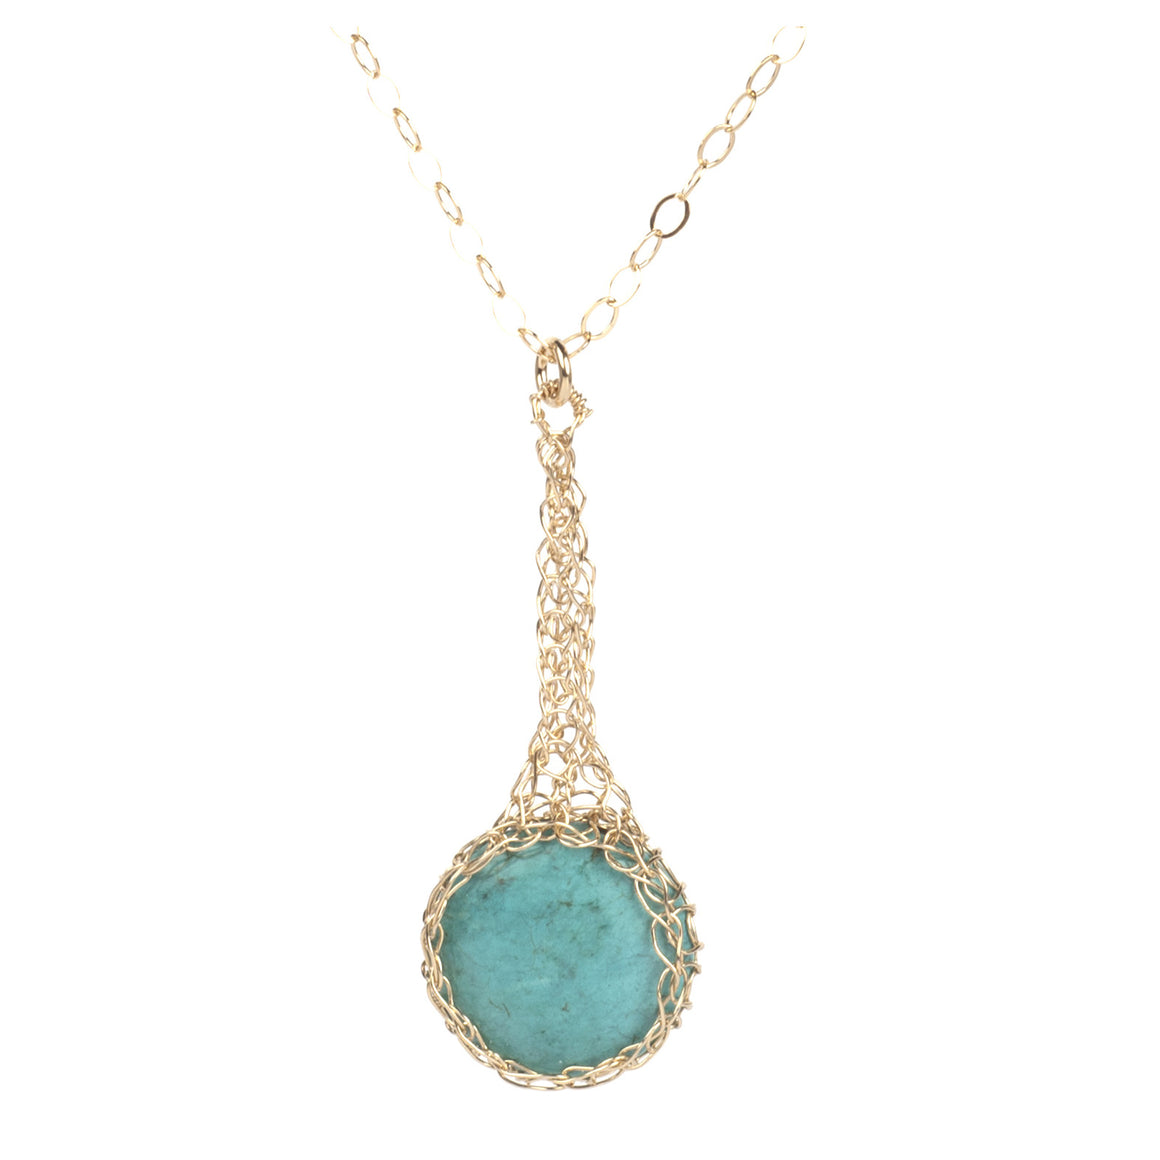 Turquoise pendant necklace , small turquoise coin crocheted in gold - Yooladesign